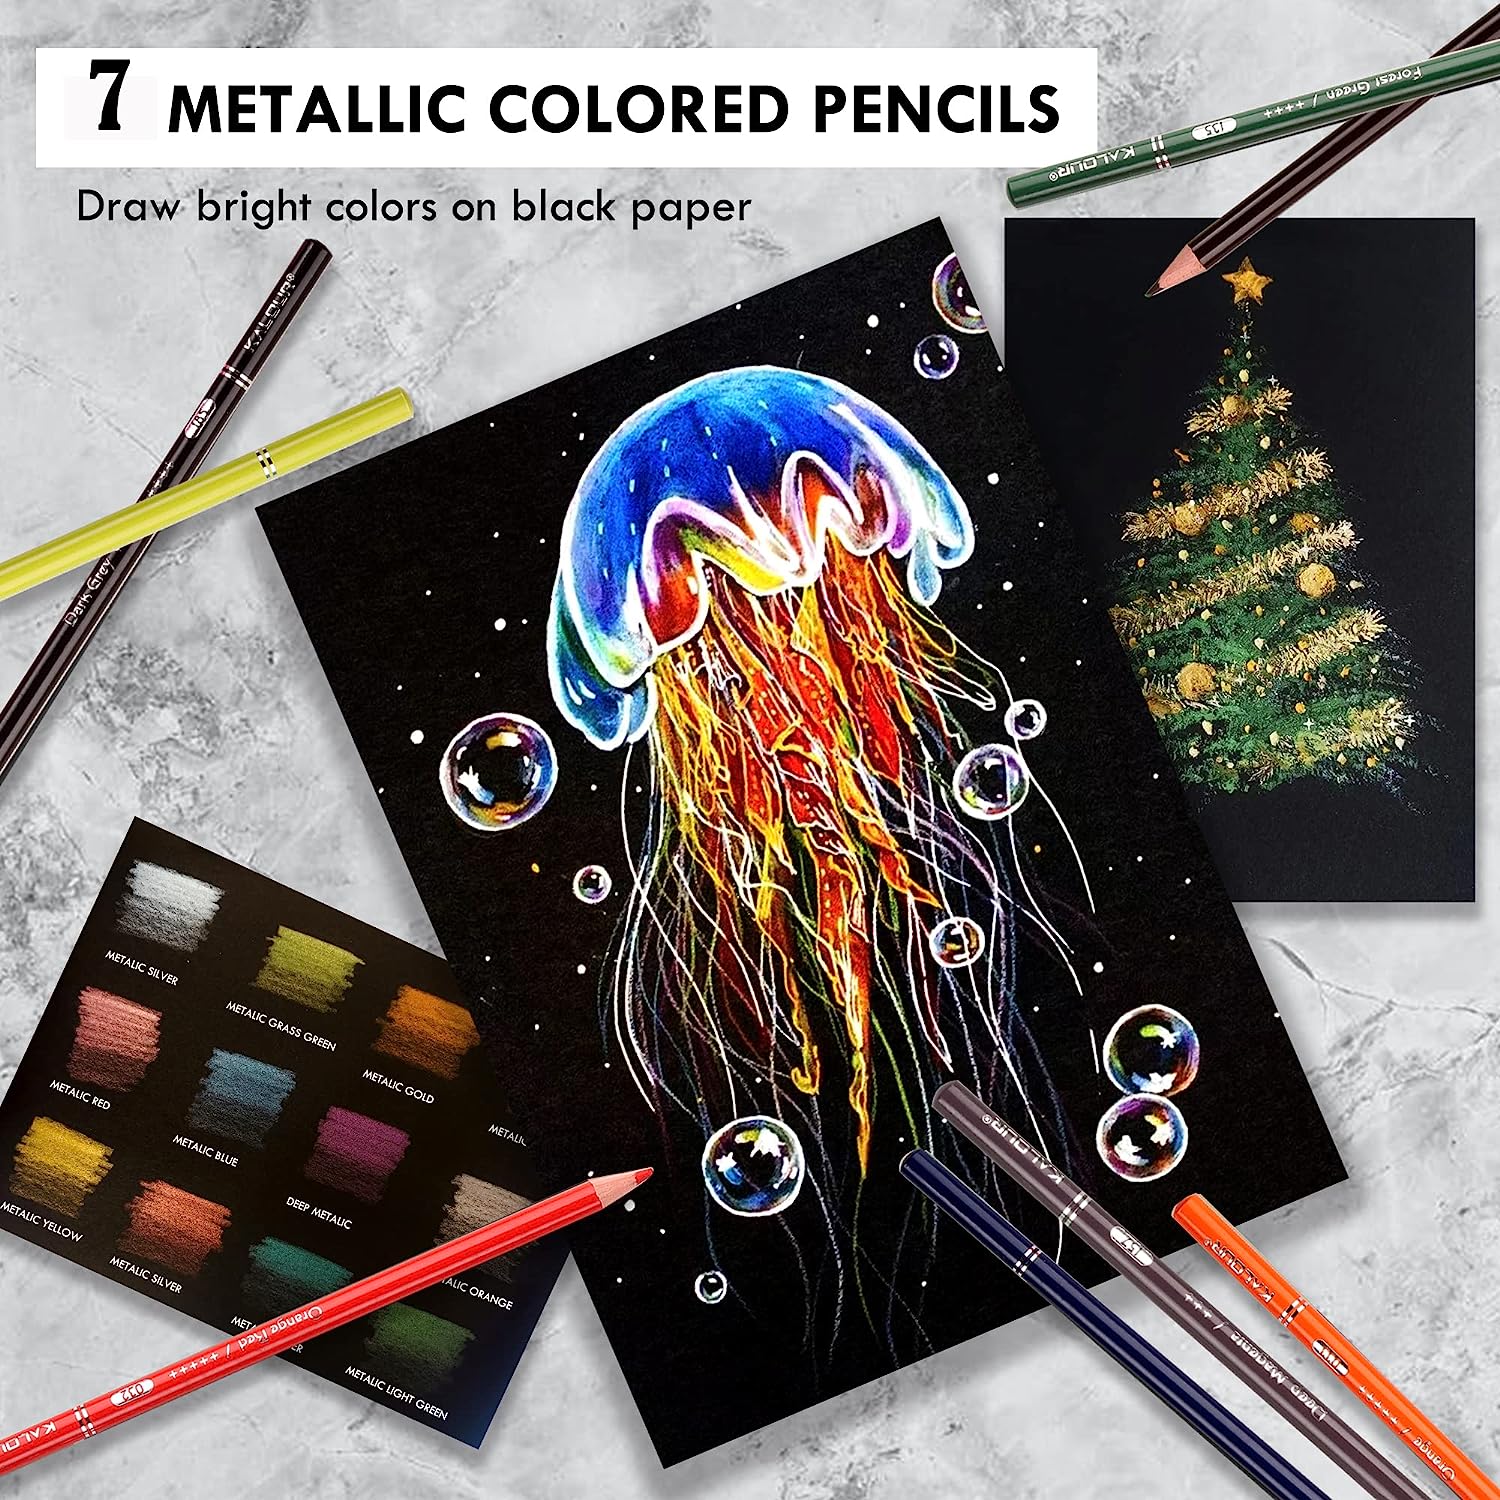 KALOUR 132 Colored Pencils Set,with Adult Coloring Book and Sketch